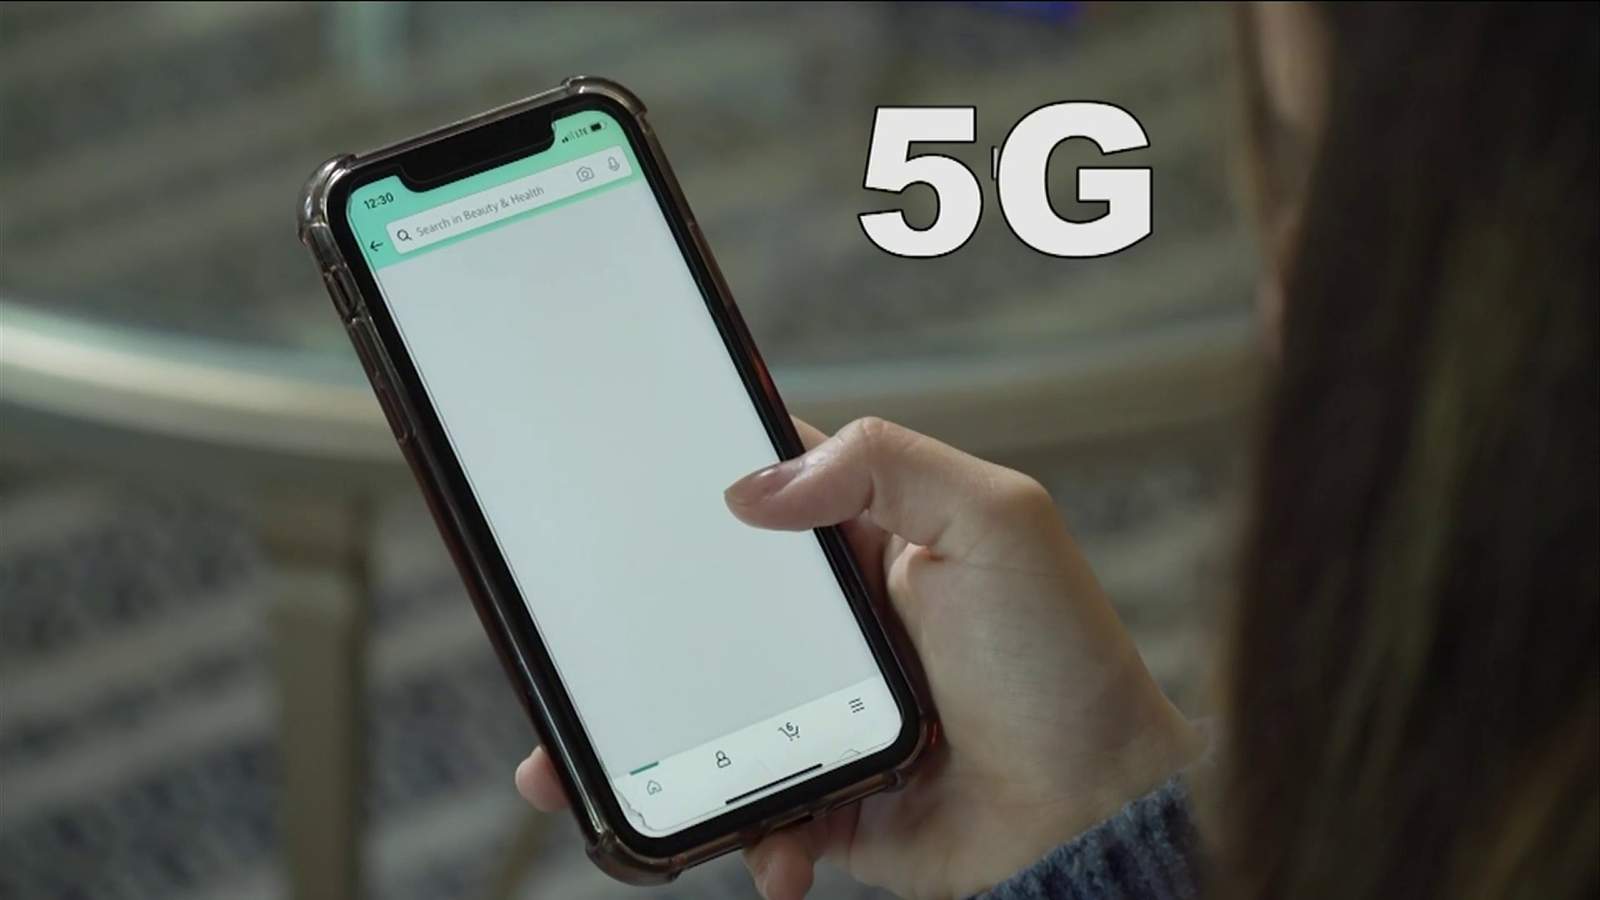 The 5G Future: New and powerful generation wireless standard here to stay